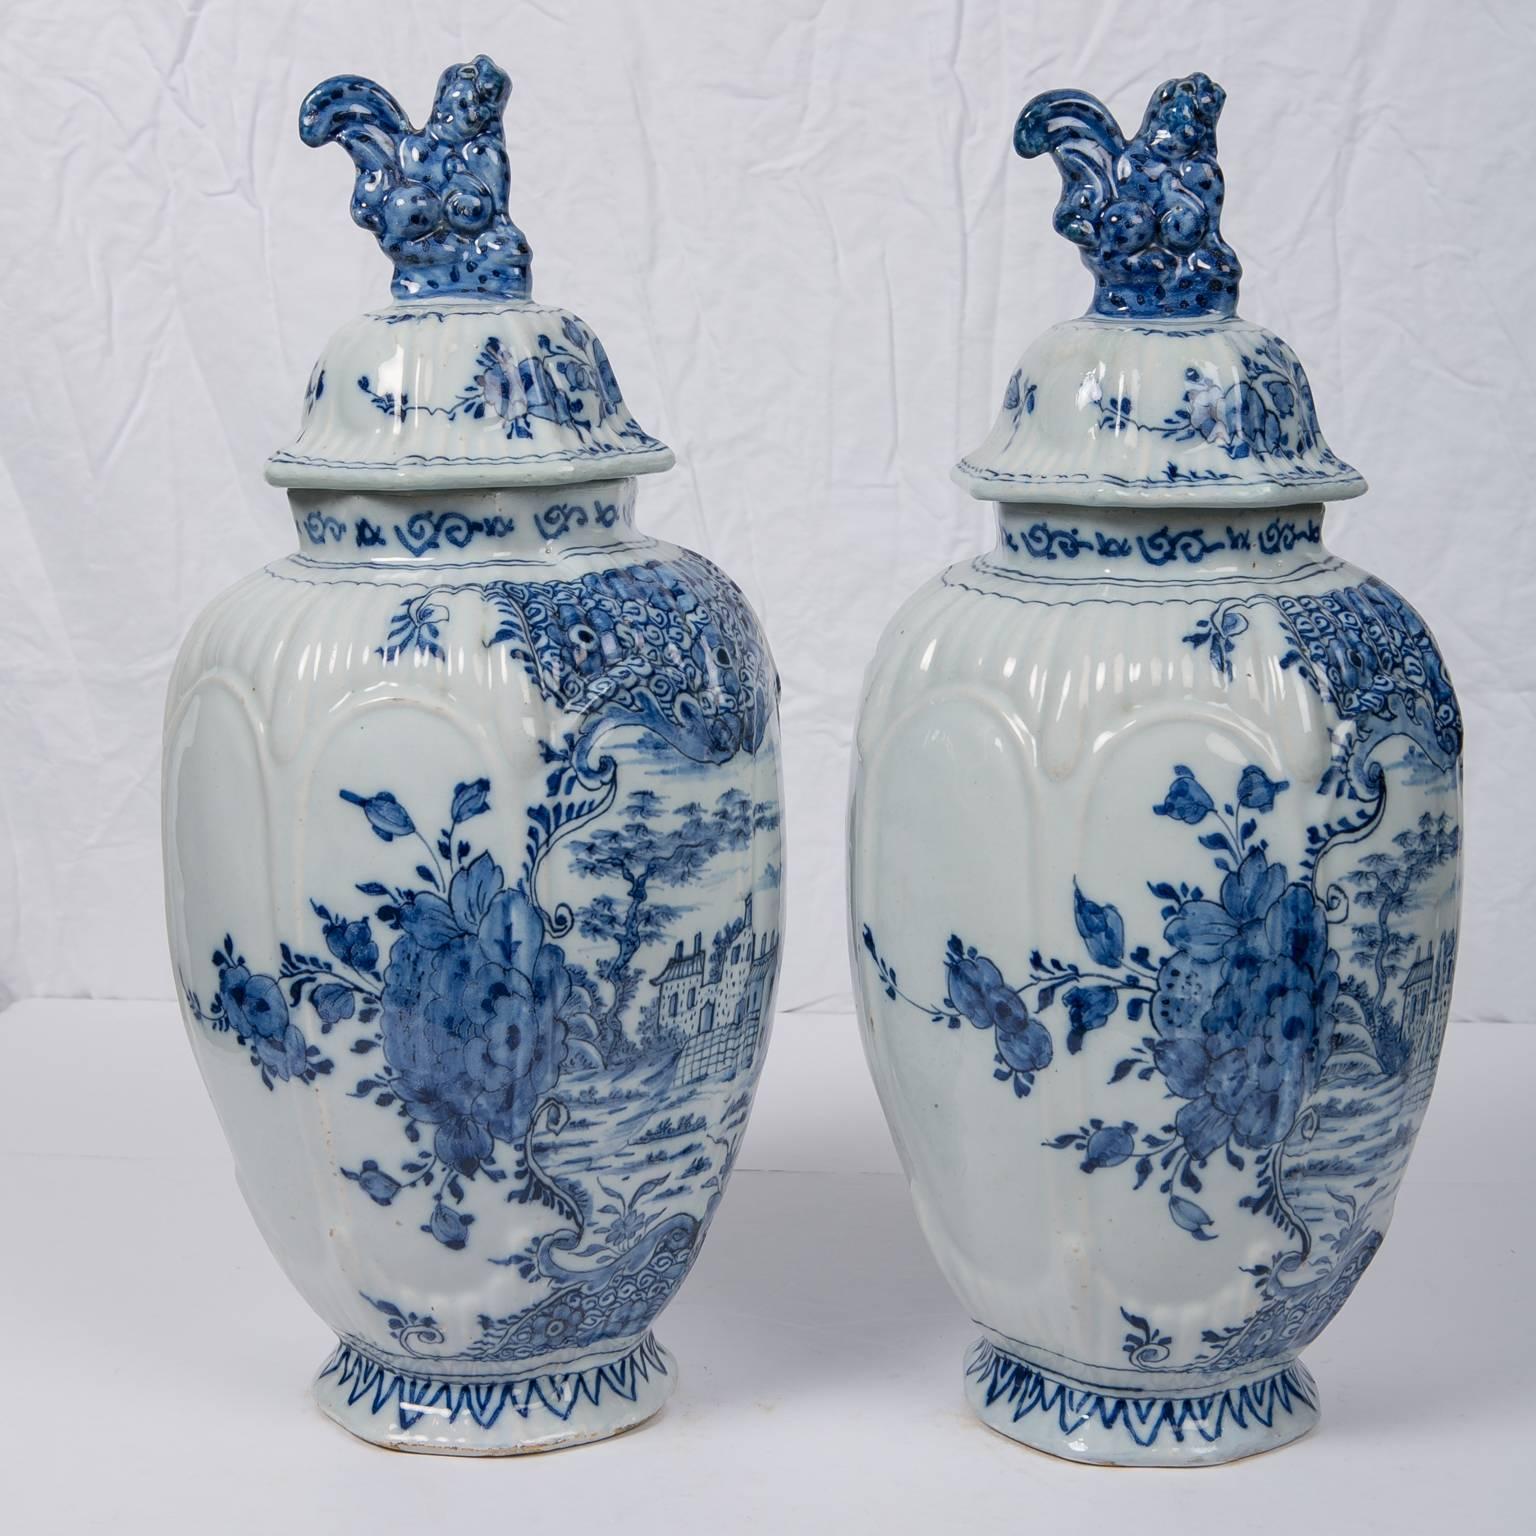 A lovely pair of antique Blue and White Delft jars. The covered jars are ribbed with panels painted in a soft cobalt blue showing a Dutch village. At the sides of each scene are lush oversized peonies.
Each vase is topped by a traditional cobalt